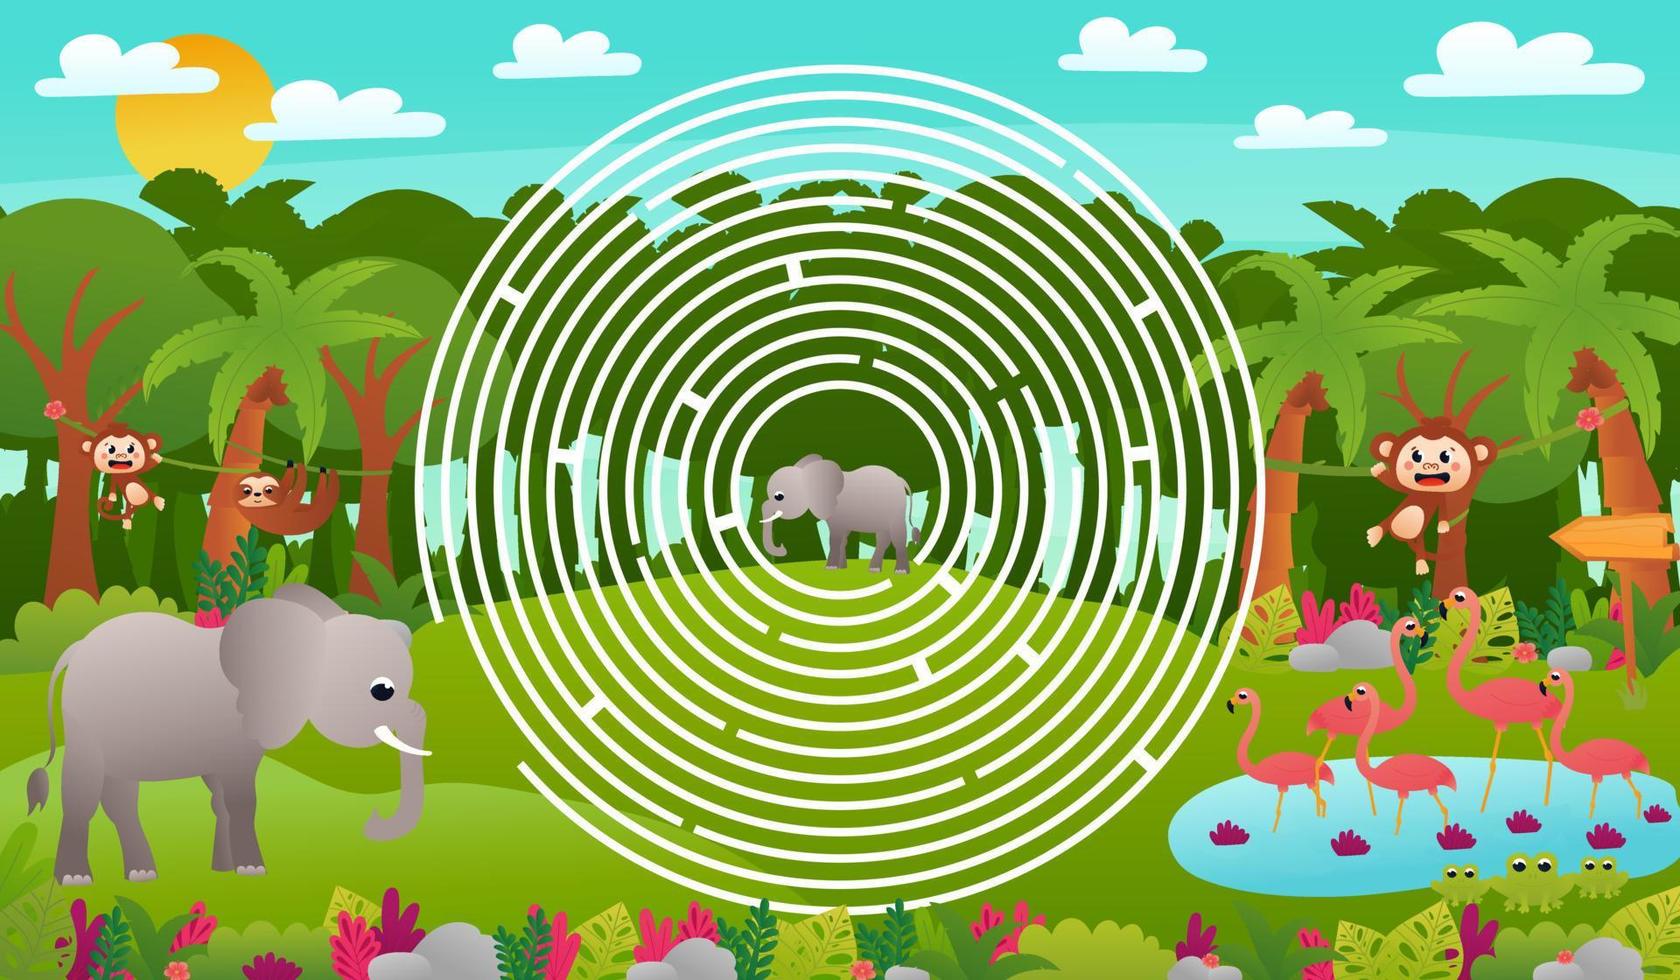 https://static.vecteezy.com/system/resources/previews/012/792/154/non_2x/tropical-jungle-forest-circle-maze-for-kids-with-cute-elephant-characters-and-flamingos-with-frogs-help-to-find-right-way-printable-worksheet-in-cartoon-style-for-school-animal-wildlife-theme-vector.jpg